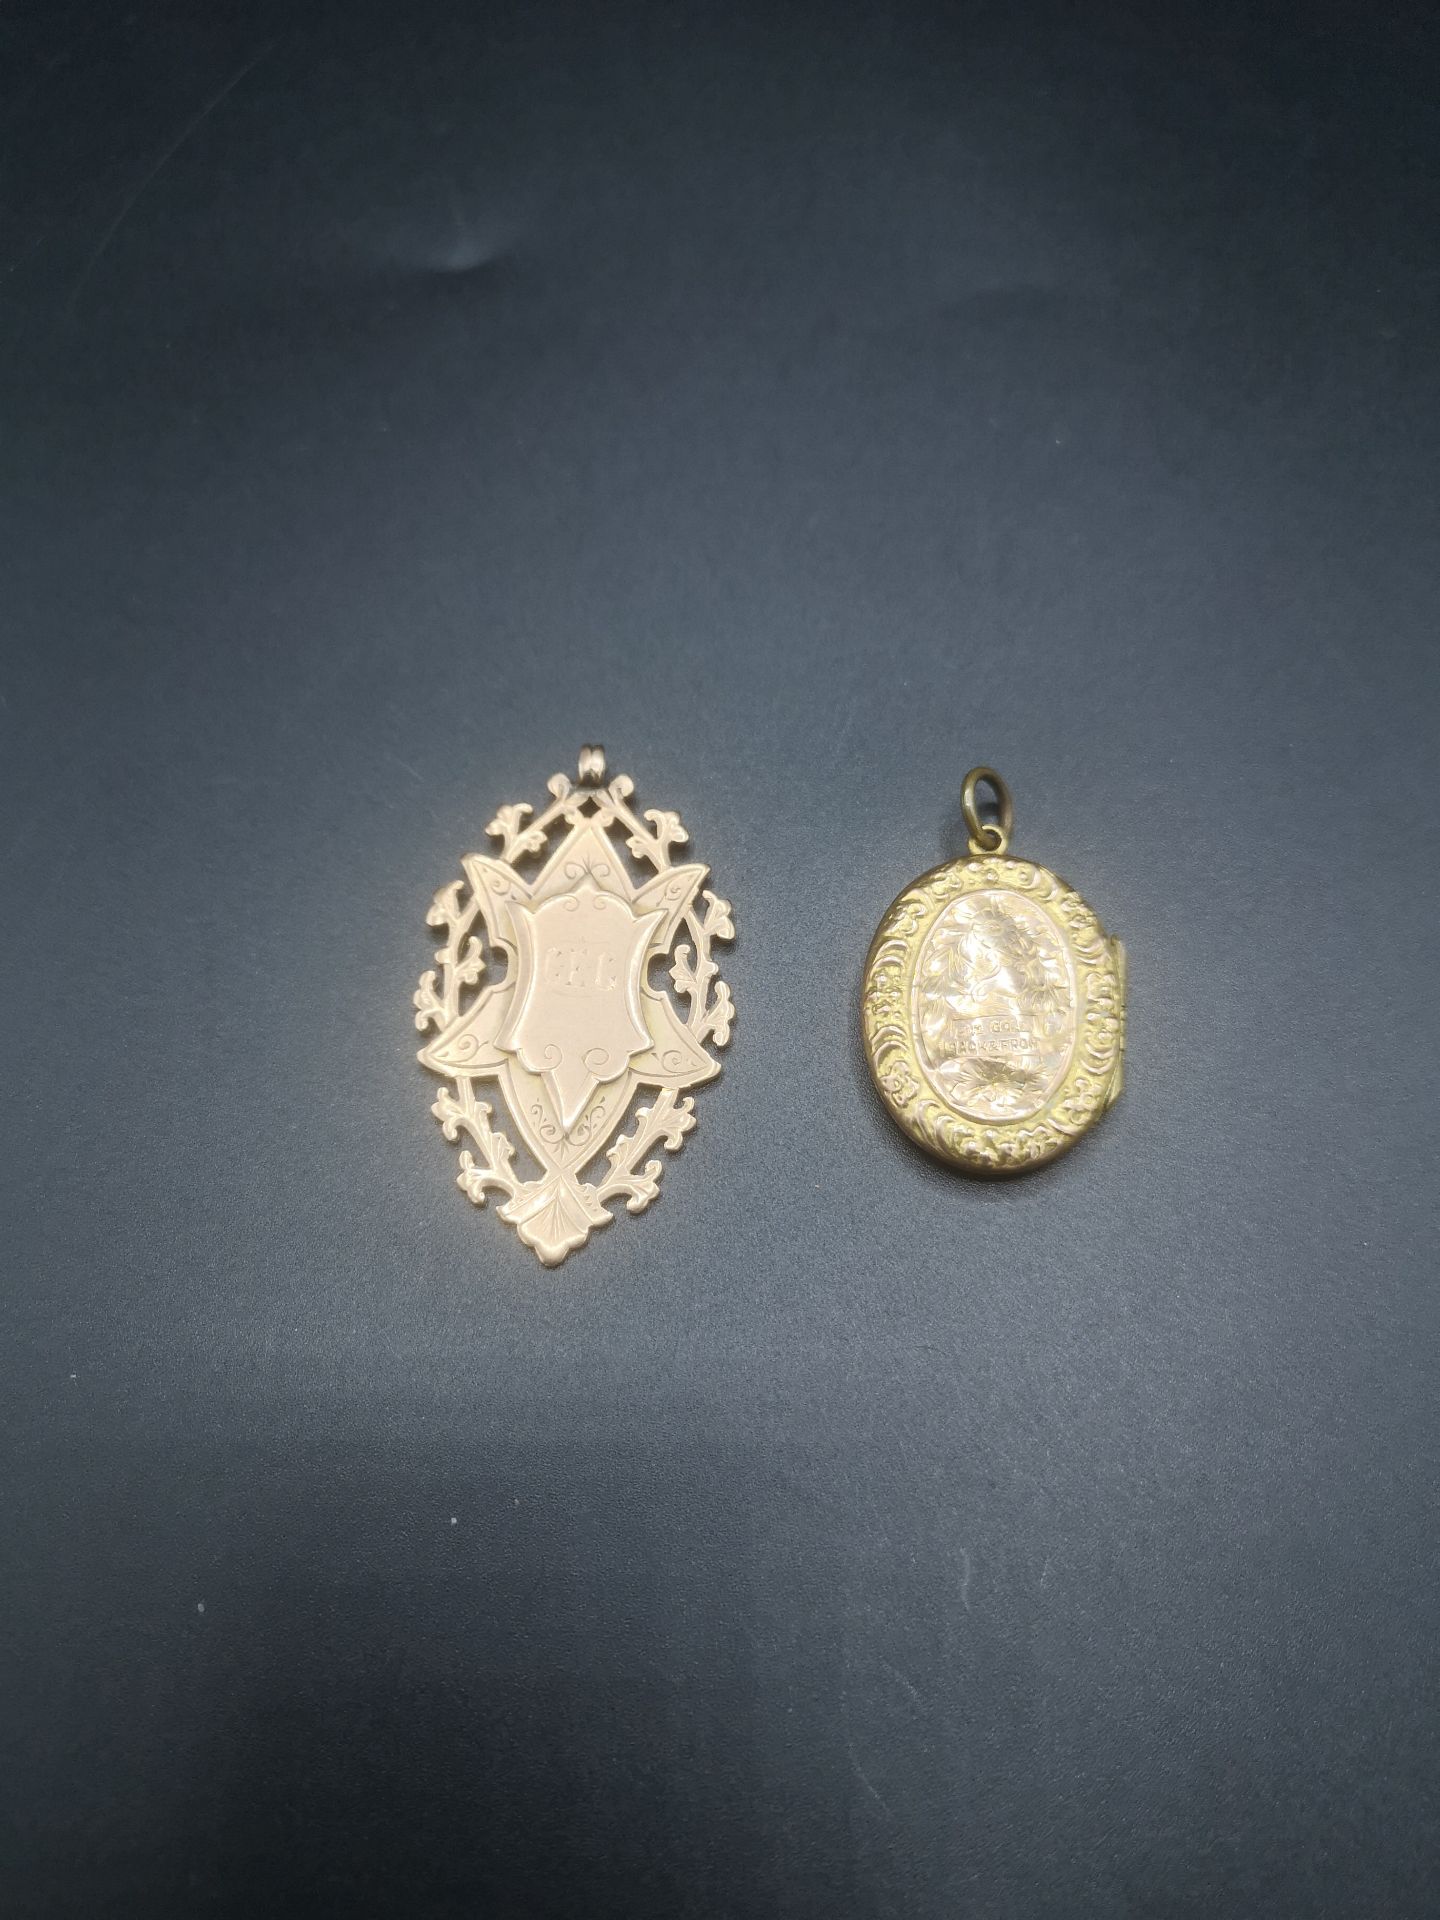 Victorian 9ct gold pendant together with a 9ct gold locket - Image 3 of 5